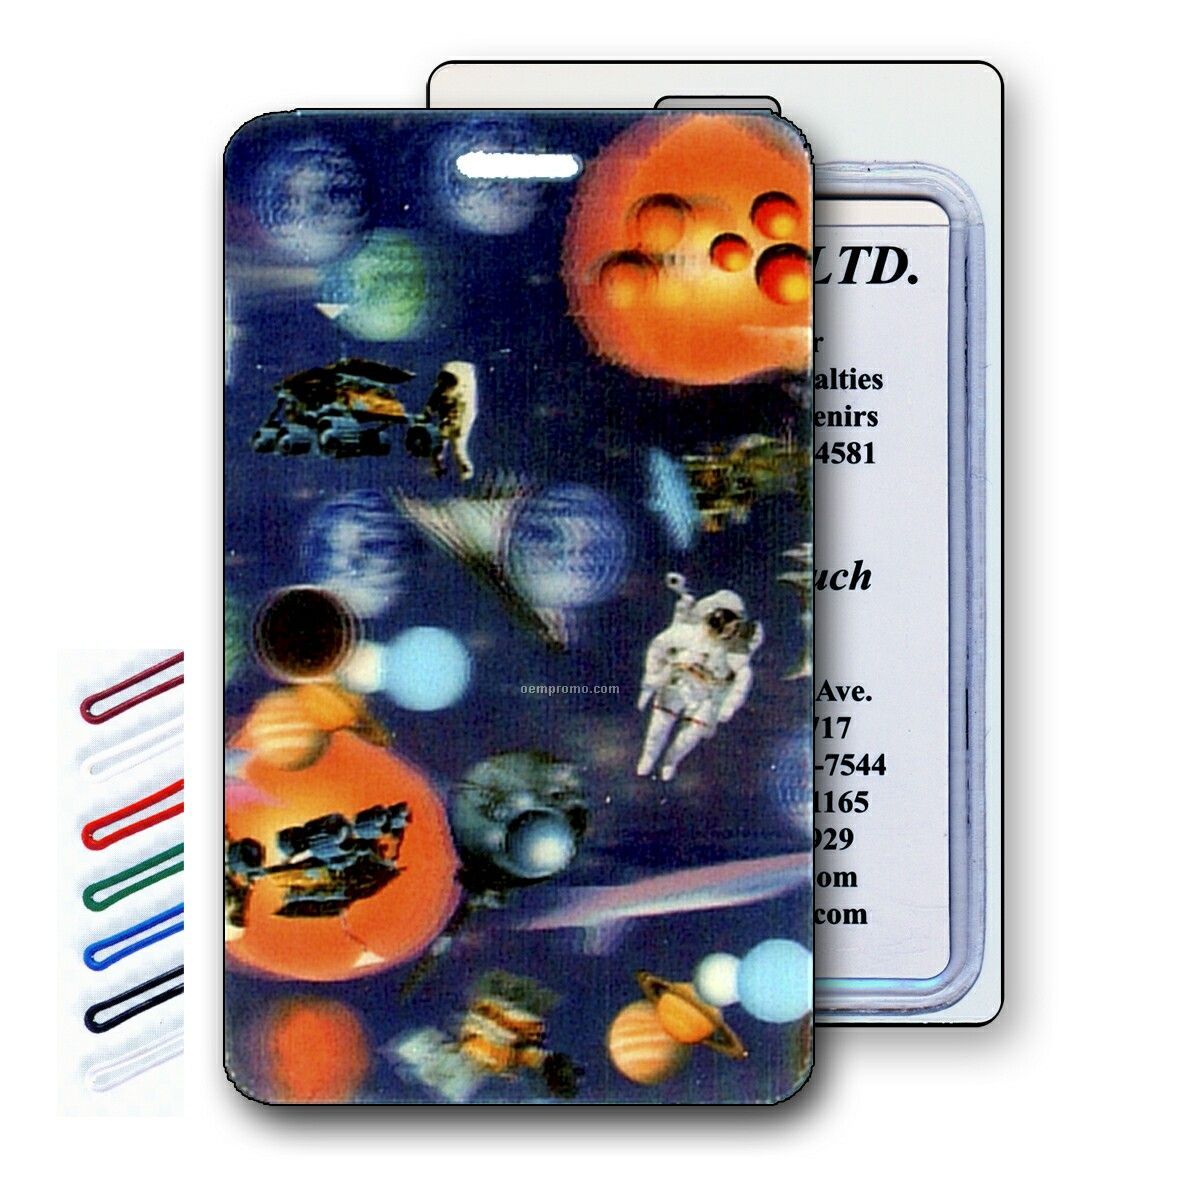 Lenticular Luggage Tags 3-d Image (Space, Astronauts)